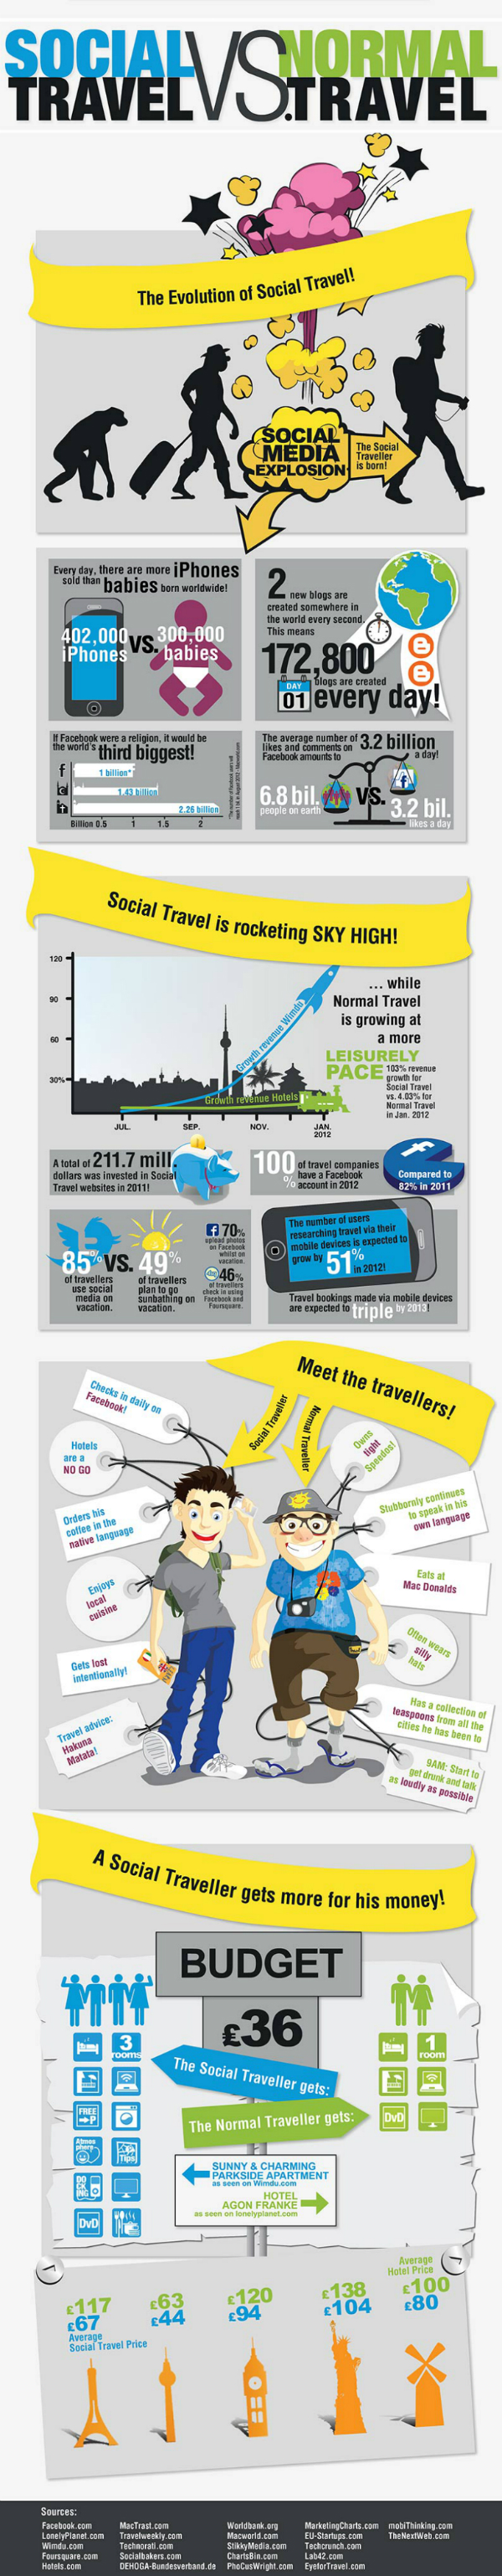 social travel infographic